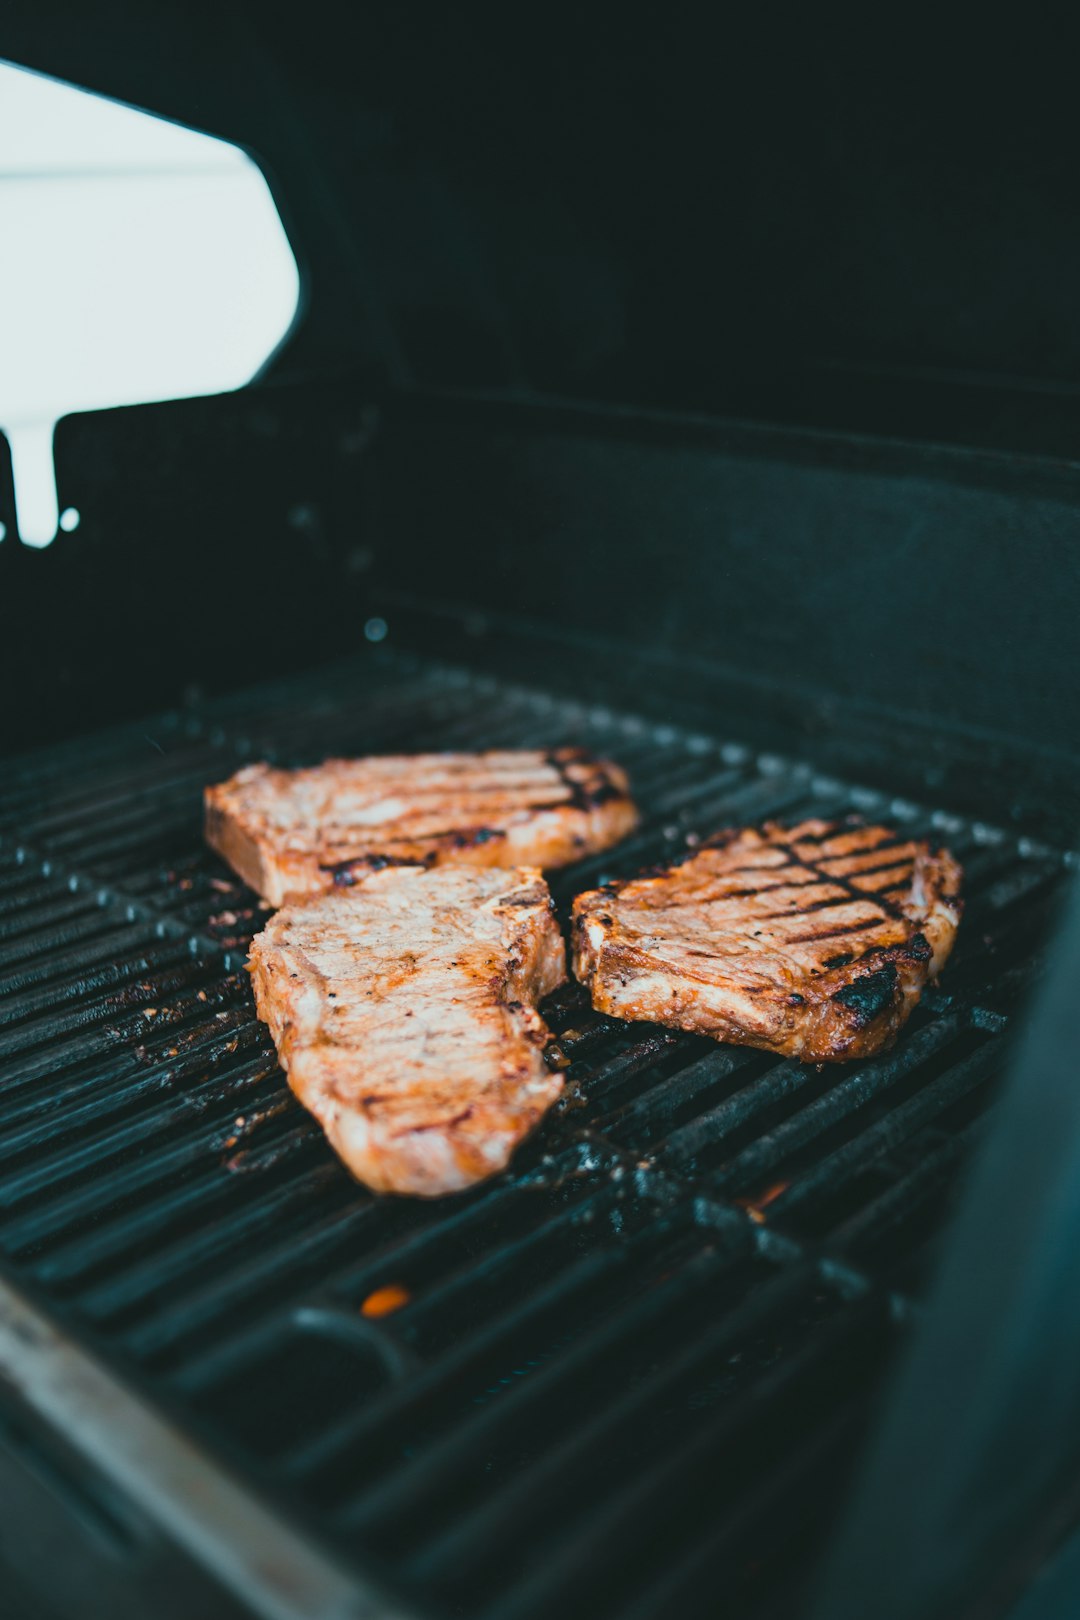 grilled meat on black grill